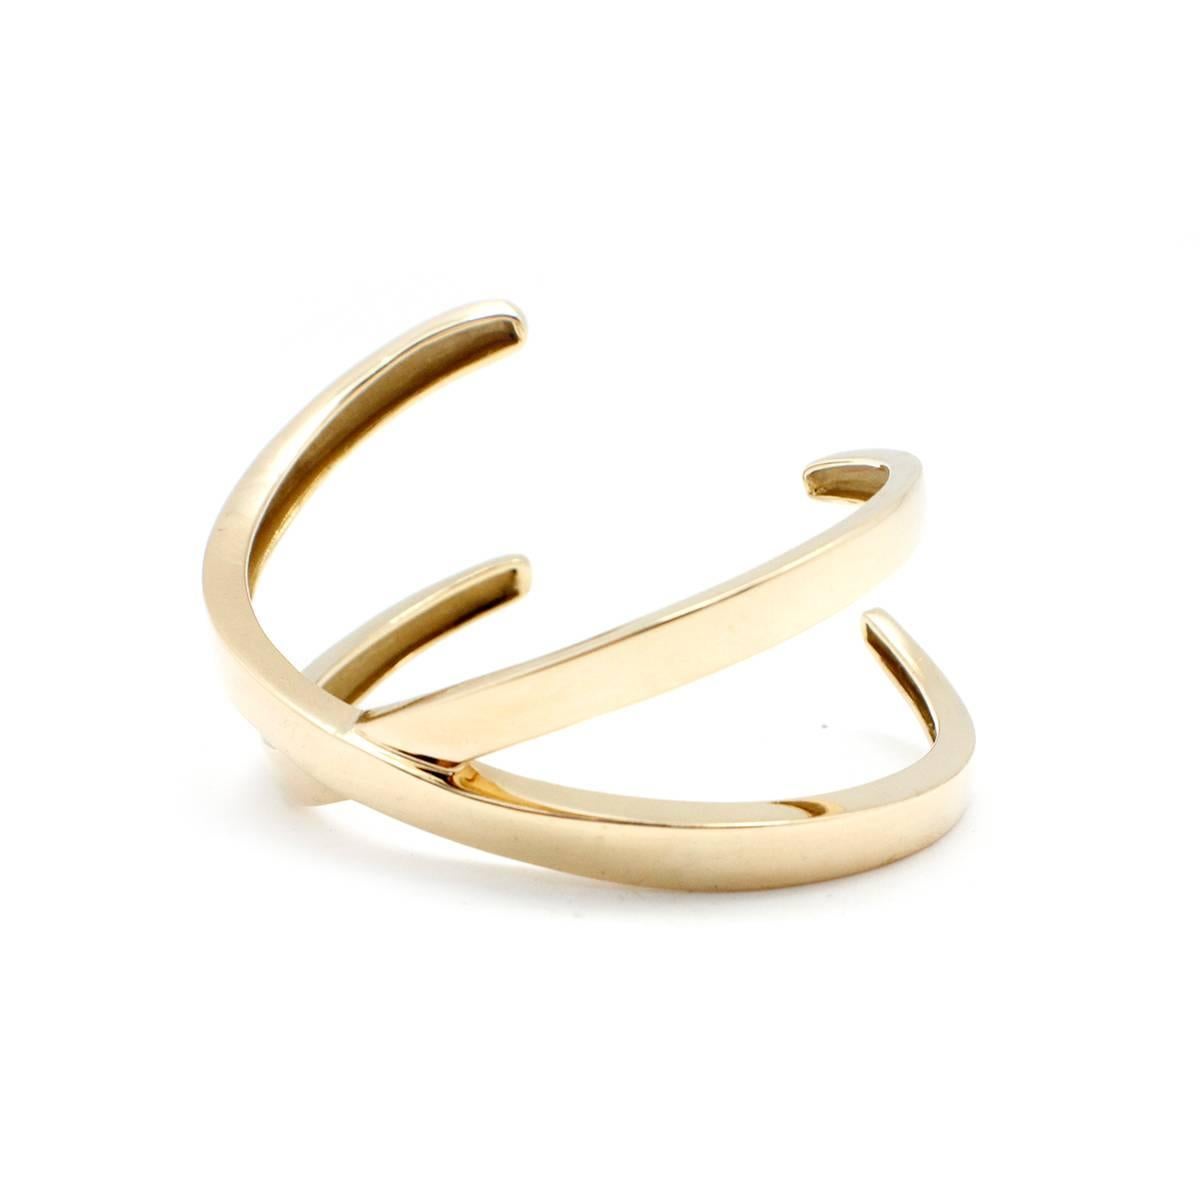  Tiffany & Co. Paloma Picasso Gold X Bangle Bracelet  In Excellent Condition For Sale In Scottsdale, AZ